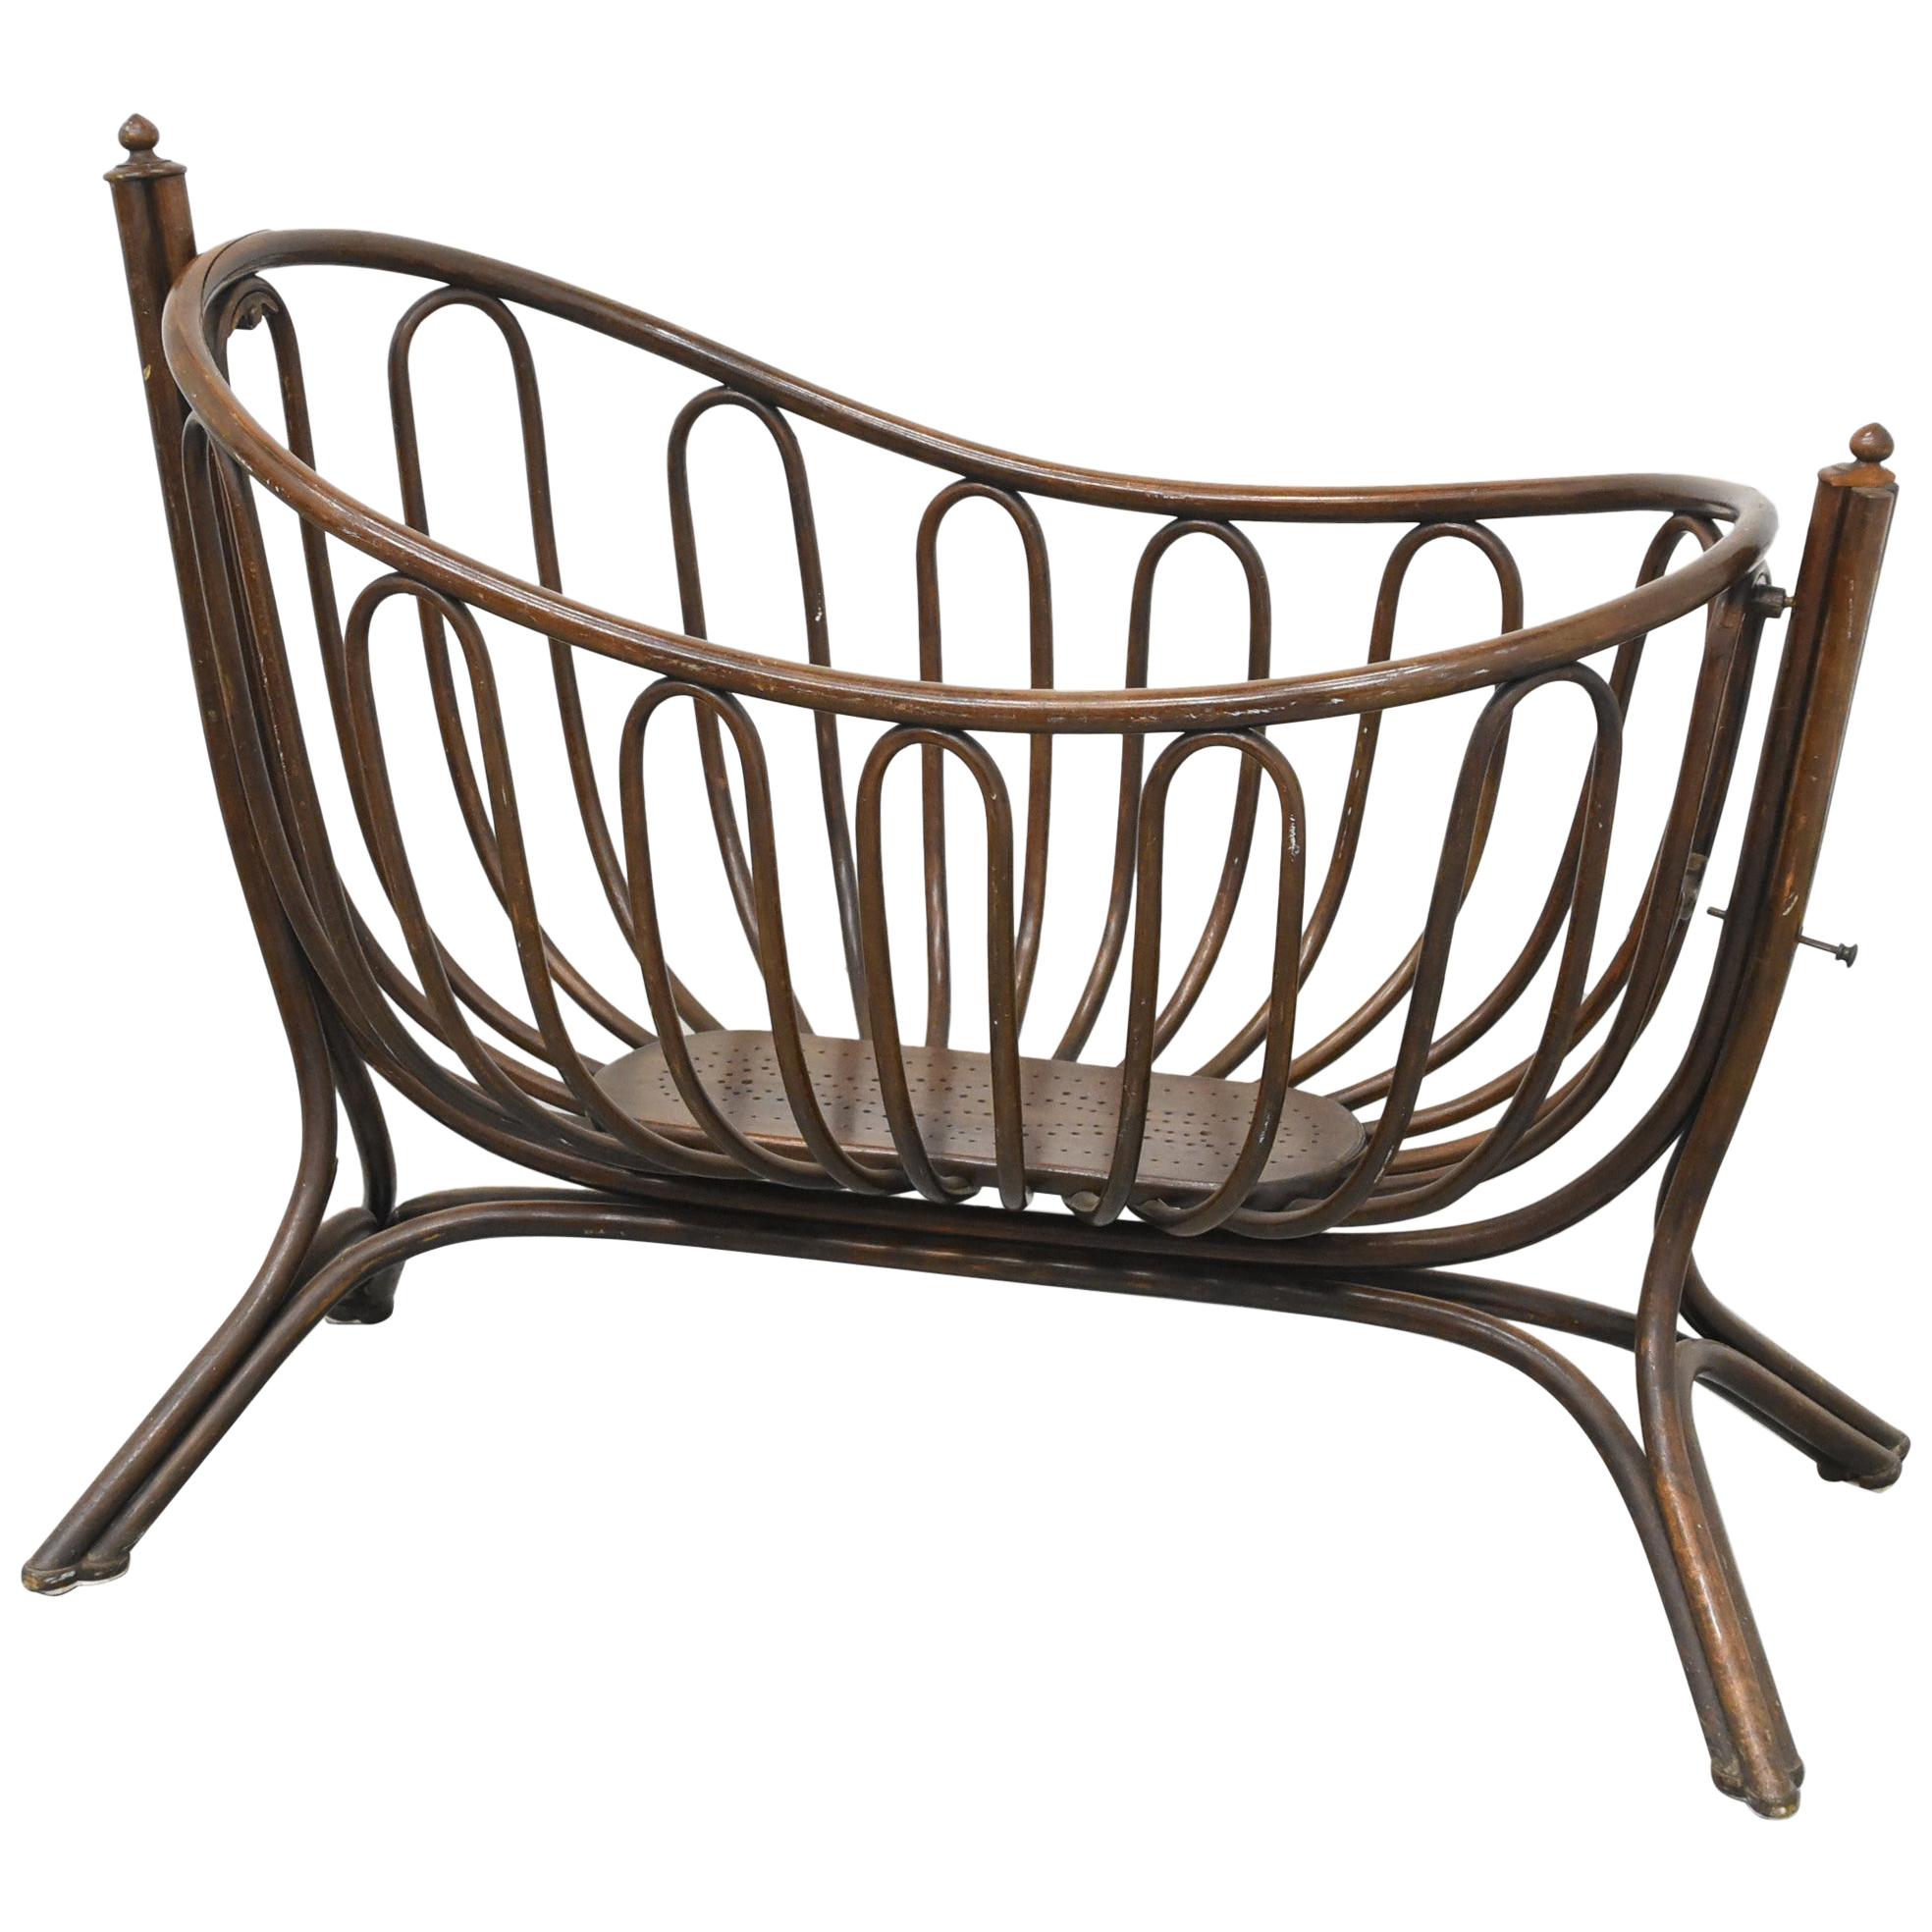 Cradle for Baby Art Nouveau Bentwood Attributed to Thonet, circa 1900, Label